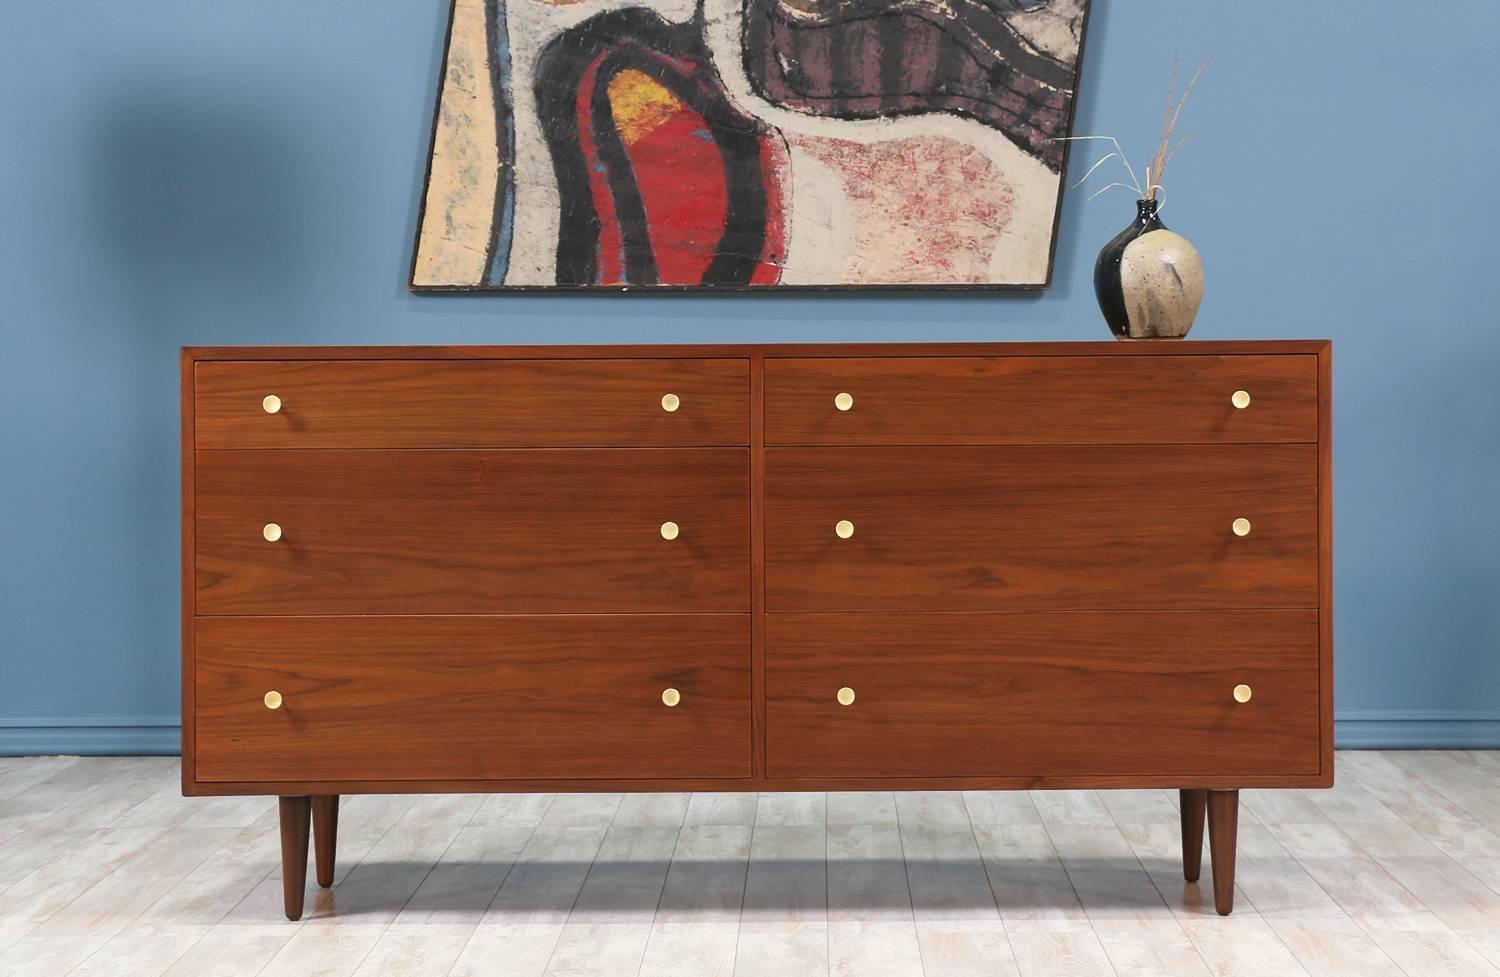 Mid-Century Modern dresser designed by Milo Baughman for Glenn of California in the United States circa 1950’s. Supported by tapered legs, this newly refinished walnut wood dresser features six spacious dovetailed drawers adorned with polished brass